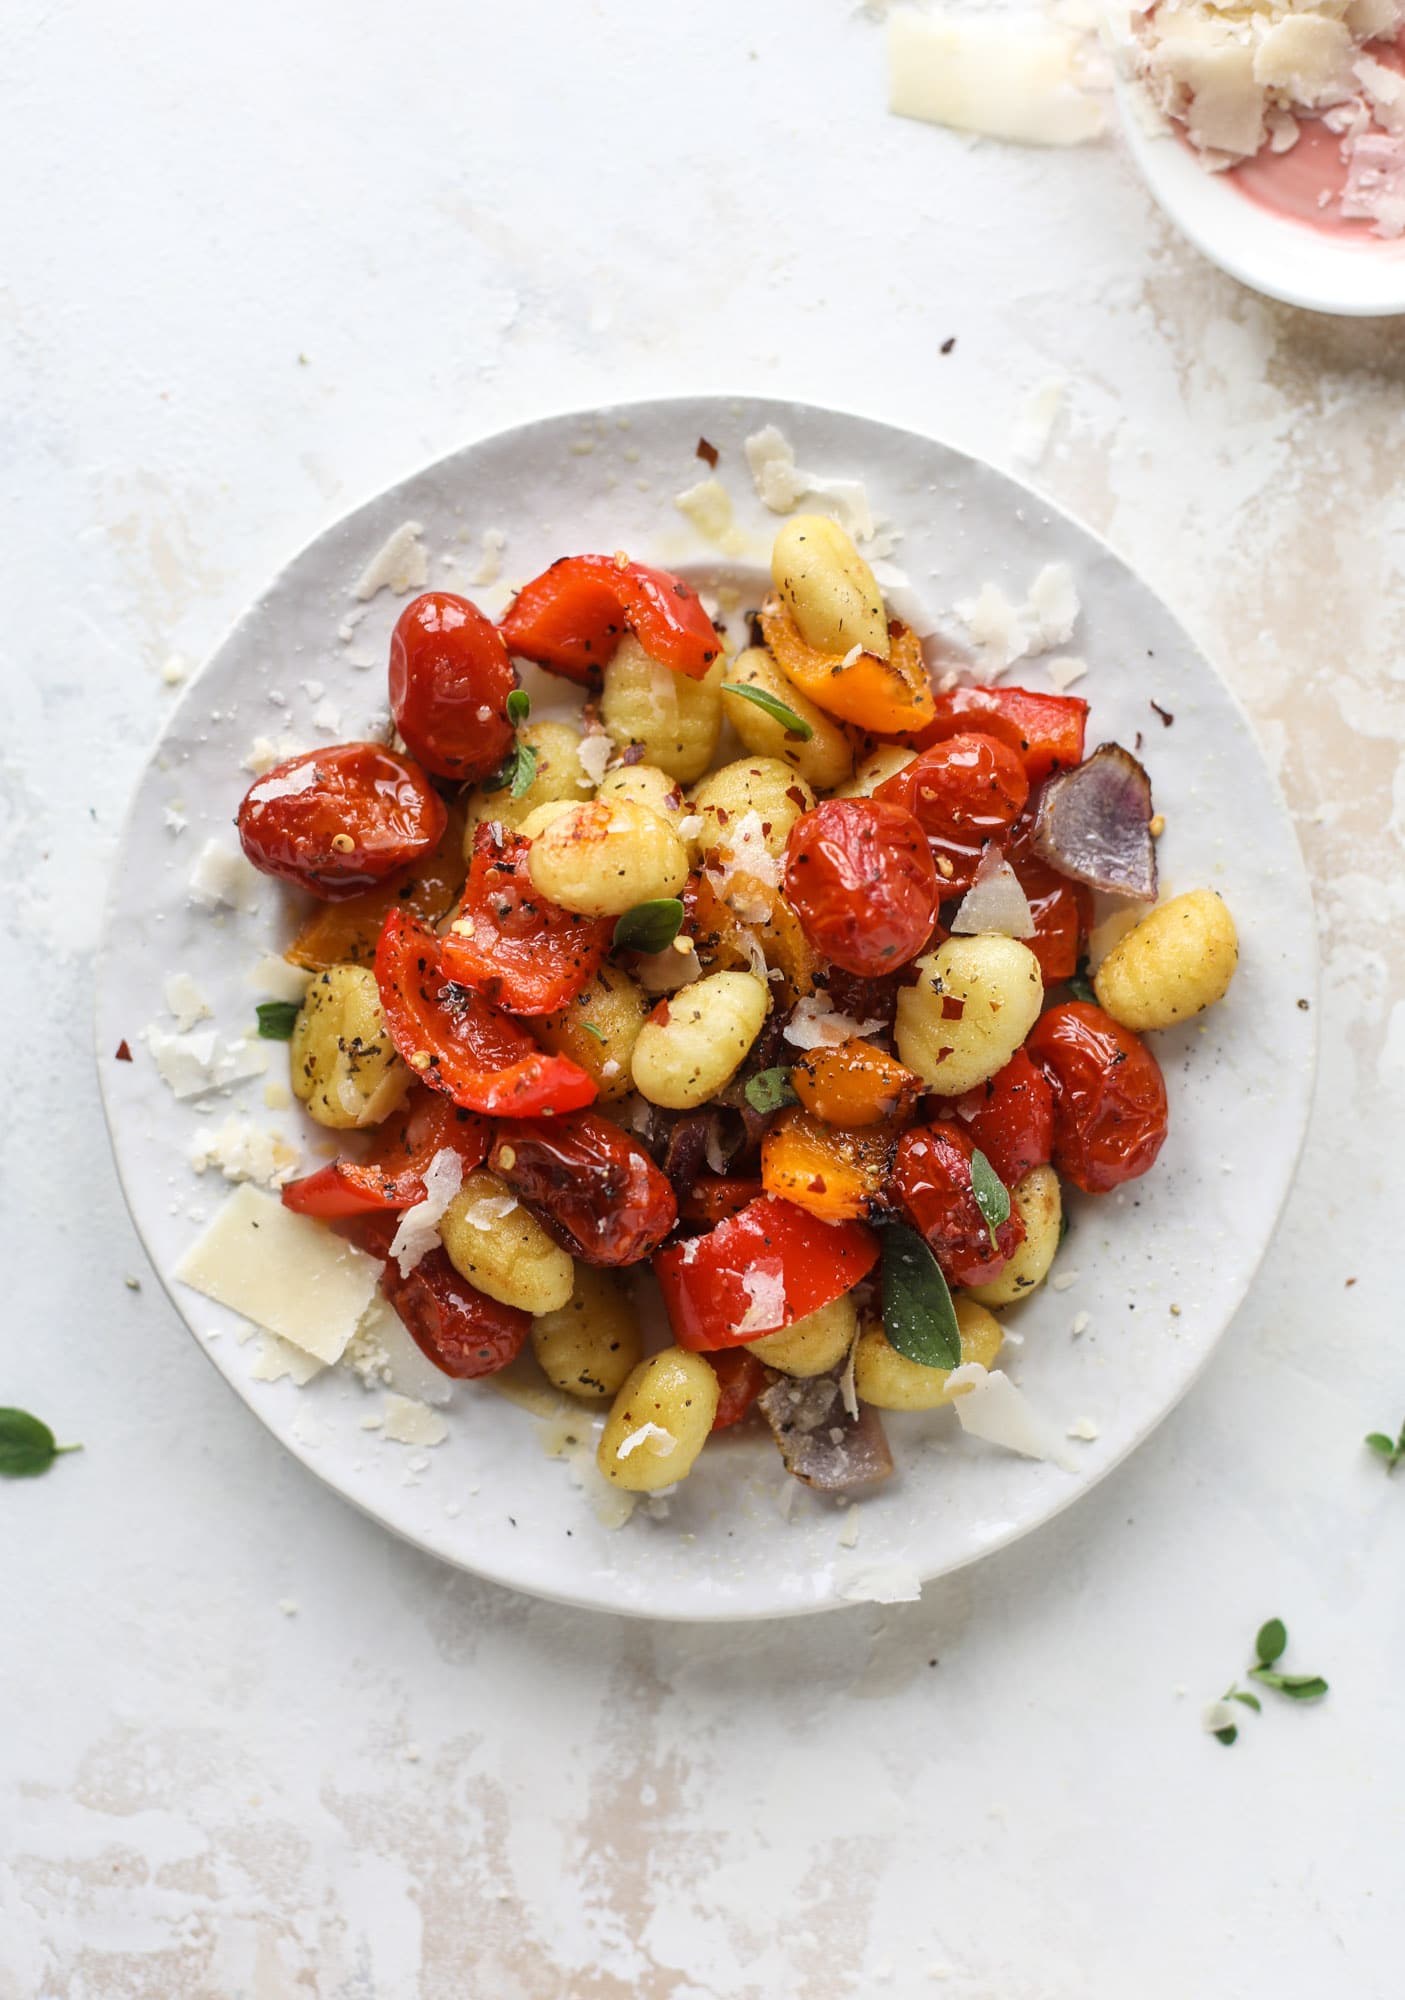 Sheet pan gnocchi is an easy meal that the whole family will love! Toasted gnocchi along with burst tomatoes and caramelized peppers makes the best dinner. I howsweeteats.com #sheetpan #gnocchi